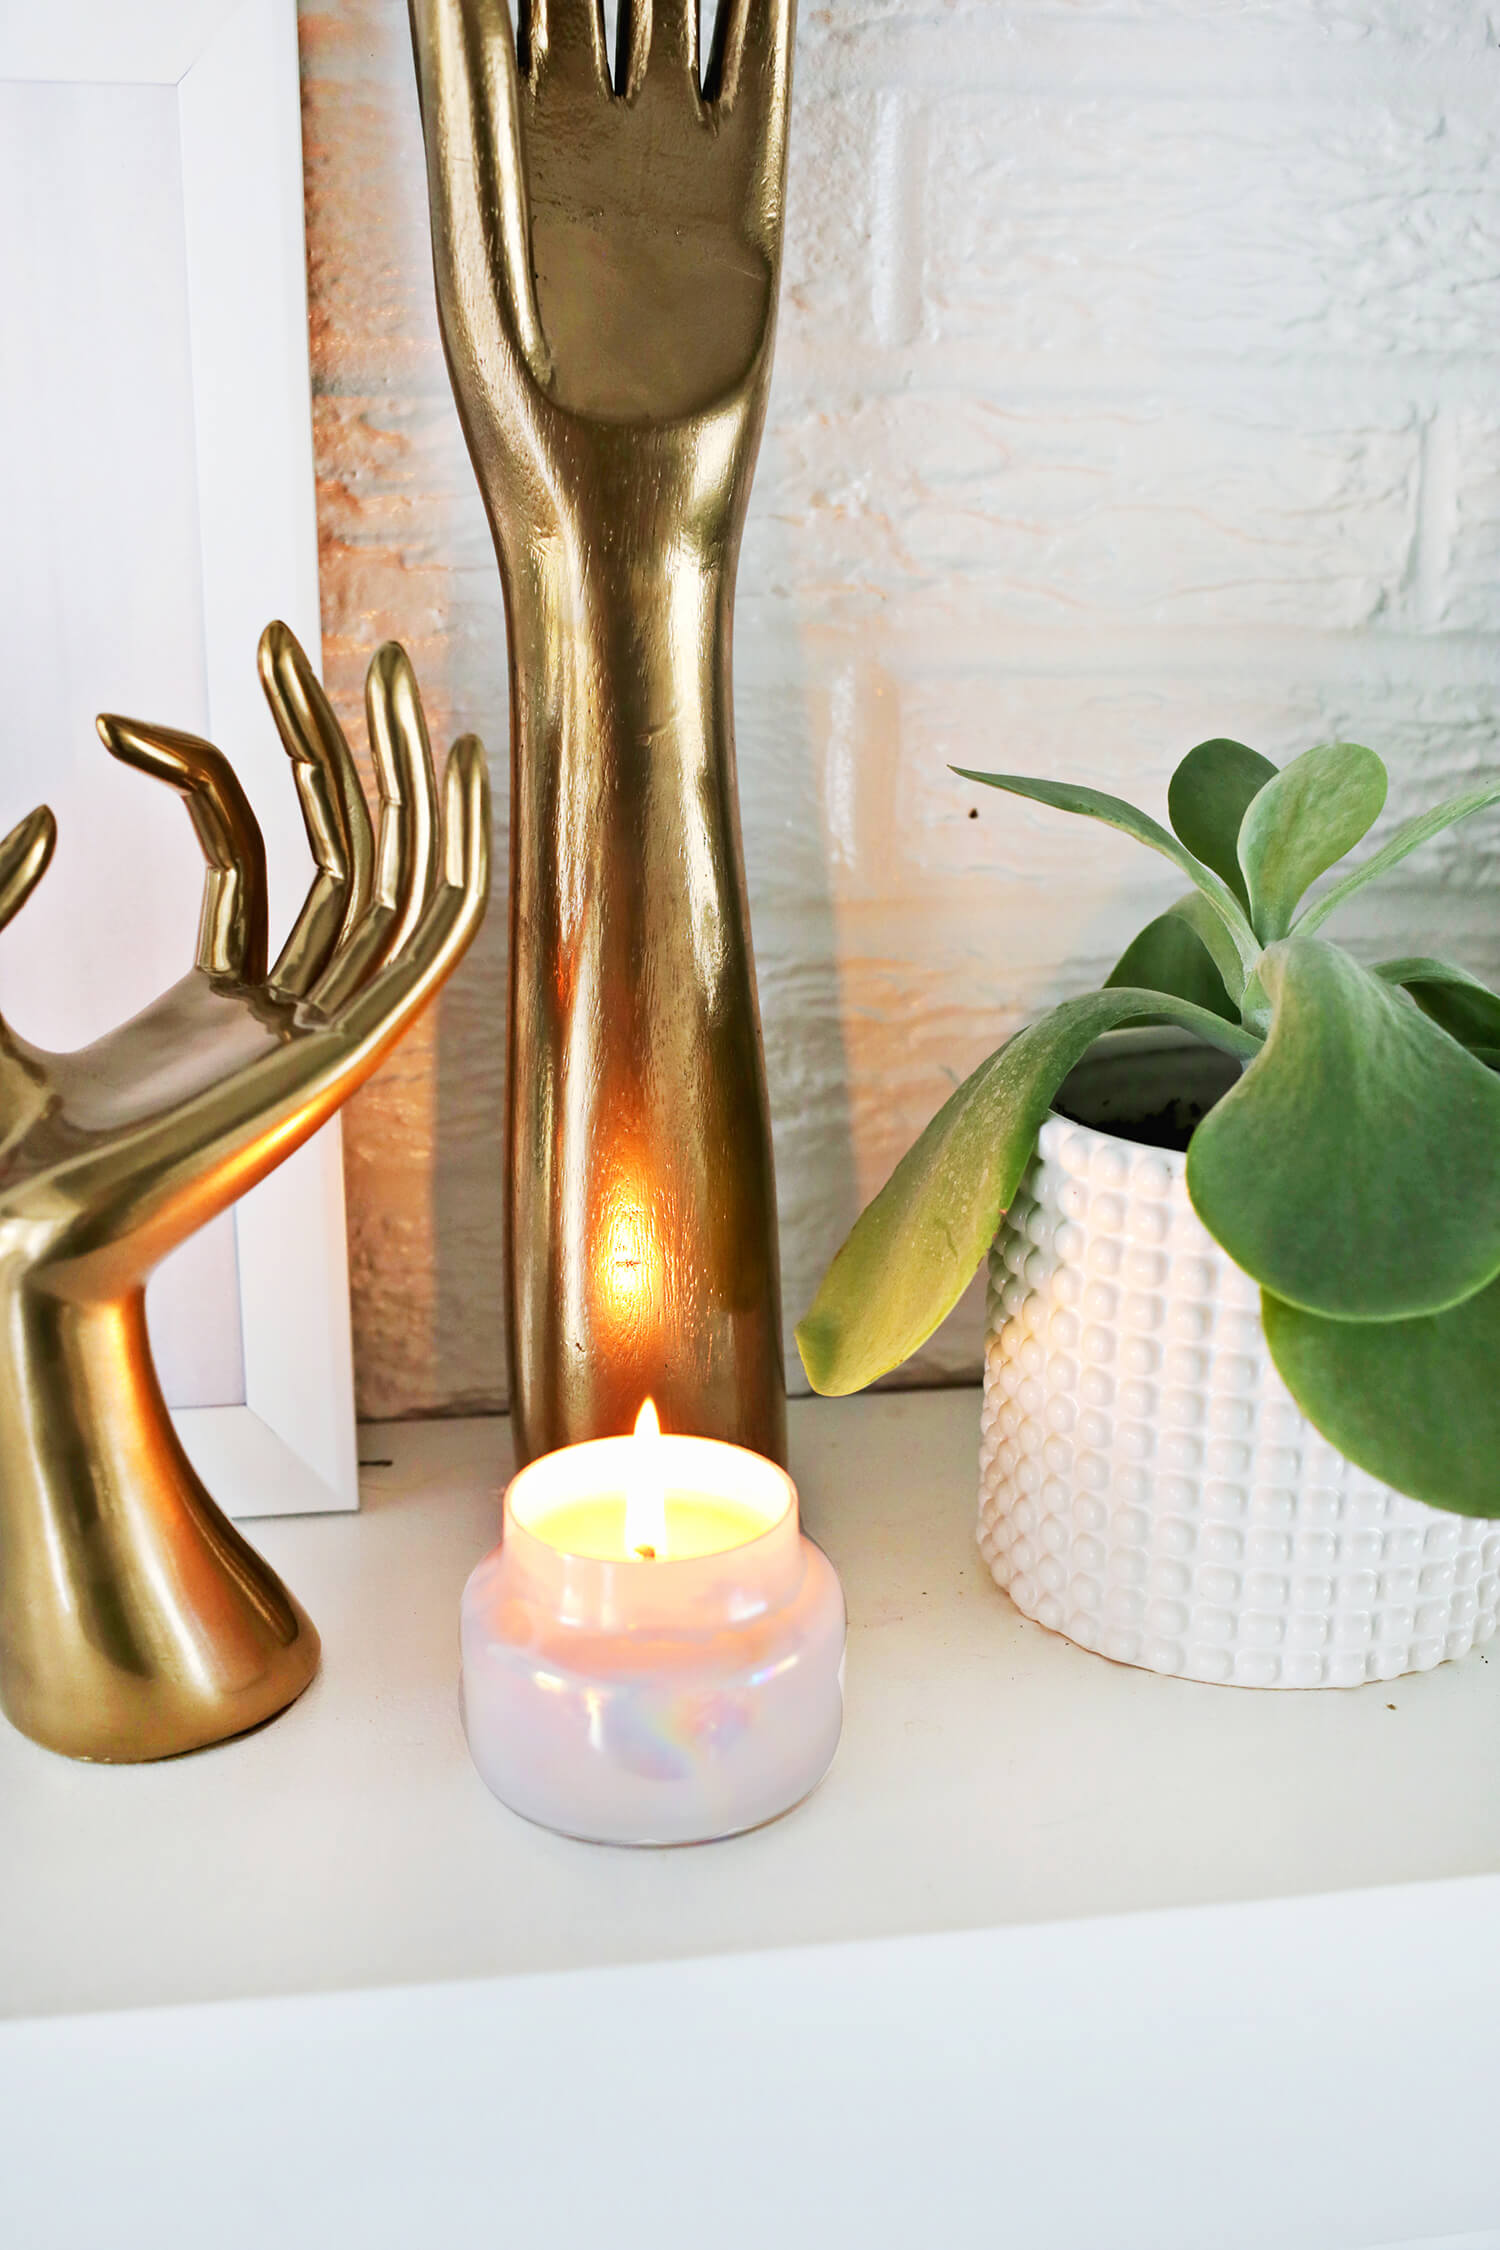 a beeswax candle lite by a plant and 2 arm and hand statues